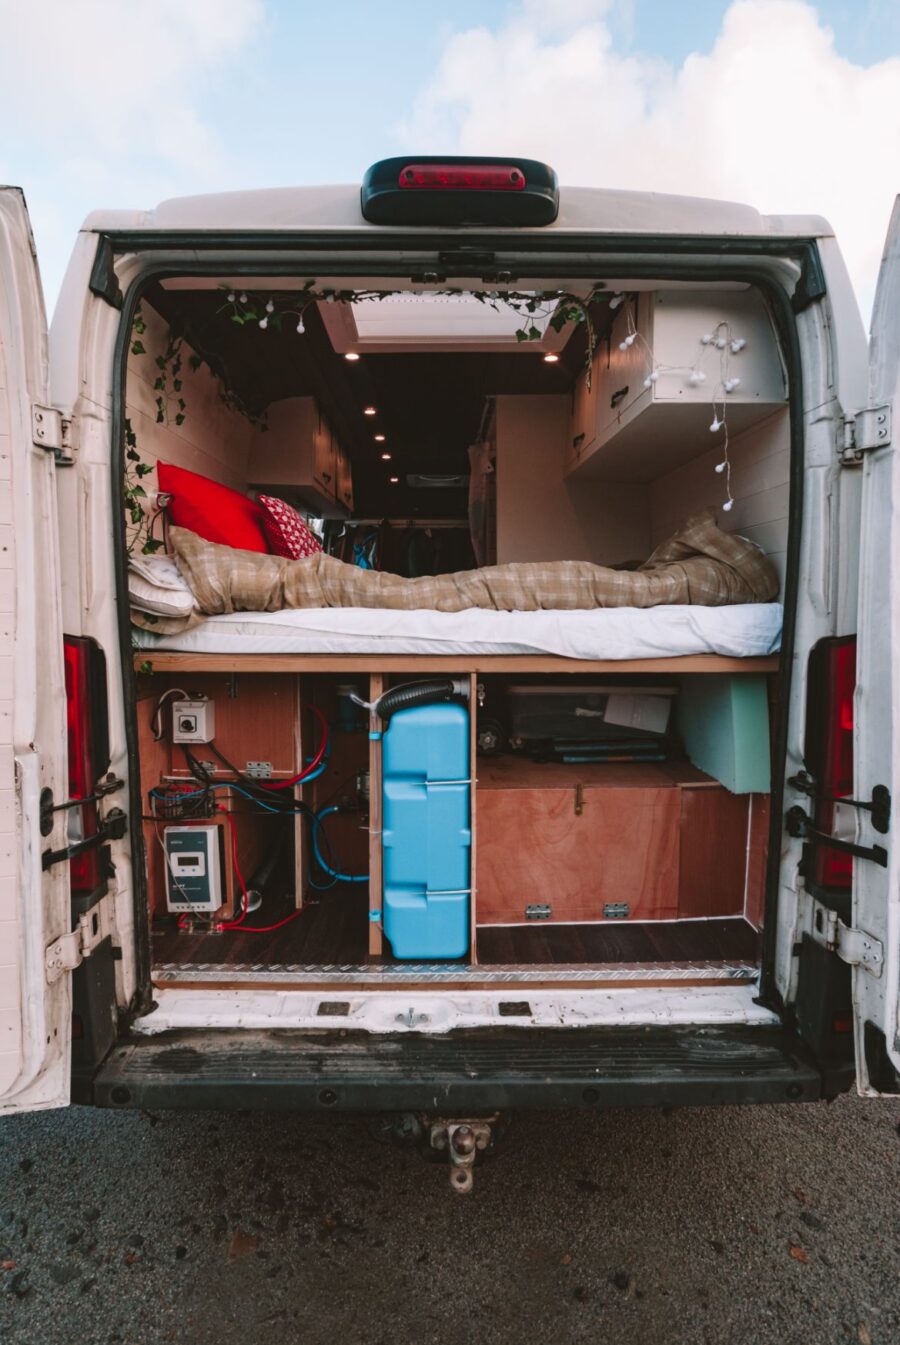 They’re Driving Around the World in Their Van 6